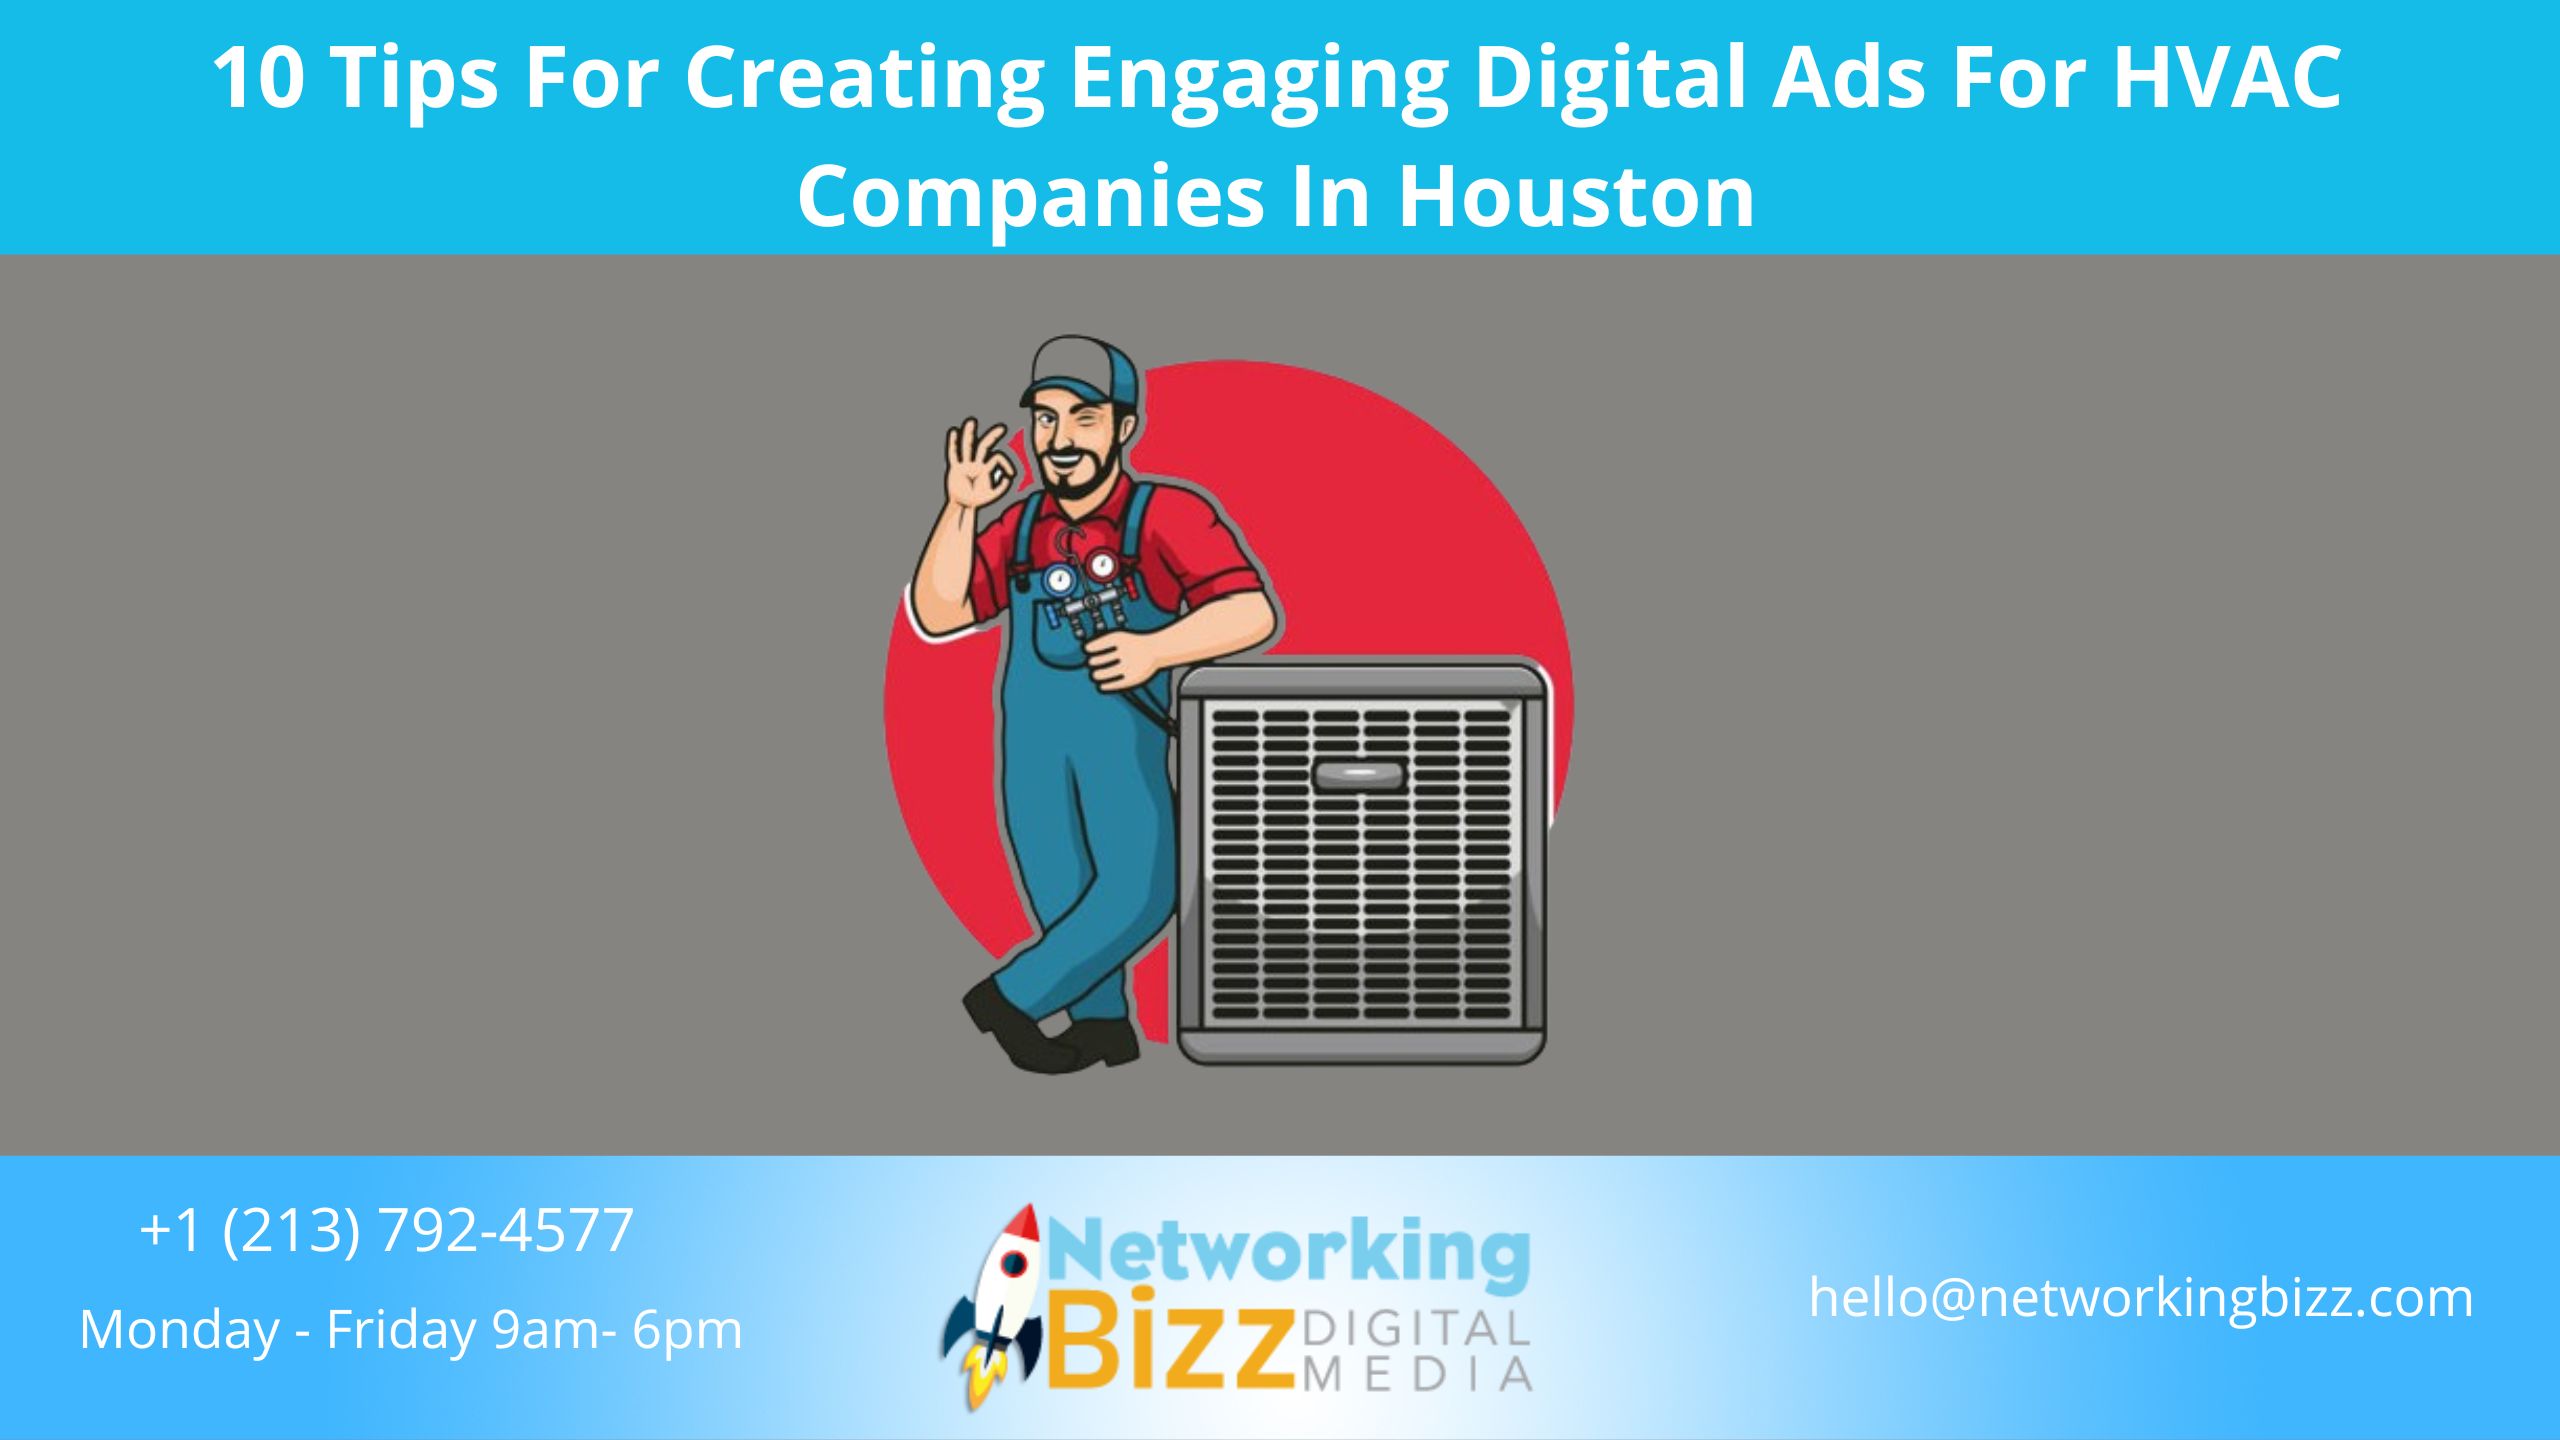 10 Tips For Creating Engaging Digital Ads For HVAC Companies In Houston  